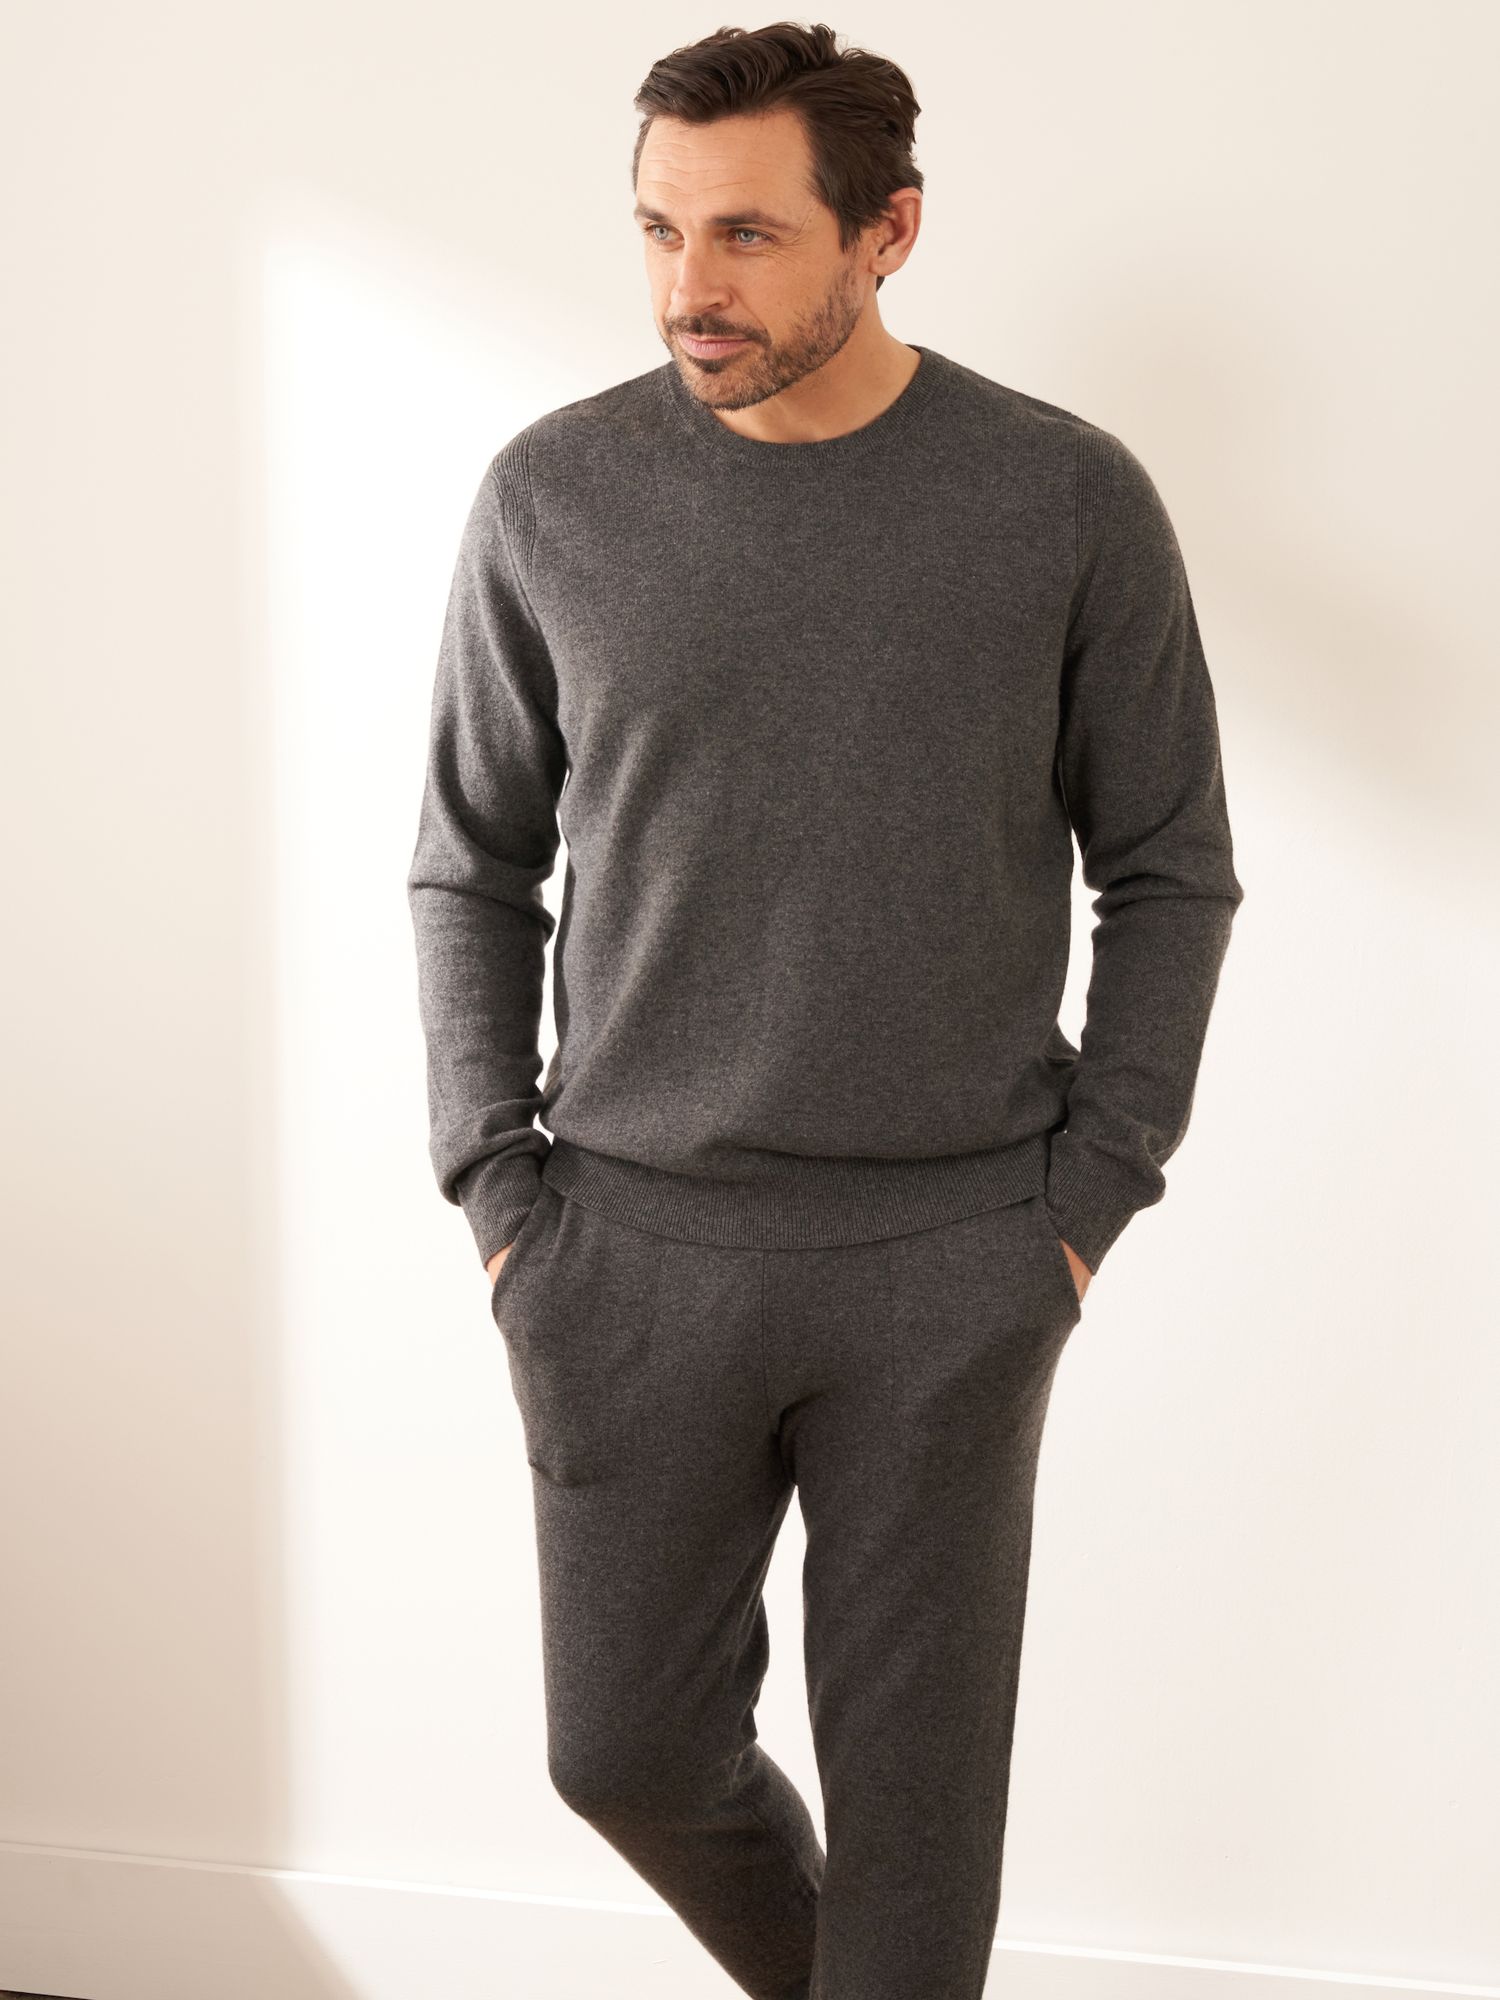 Truly Cashmere Crew Neck Jumper, Charcoal Marl at John Lewis & Partners